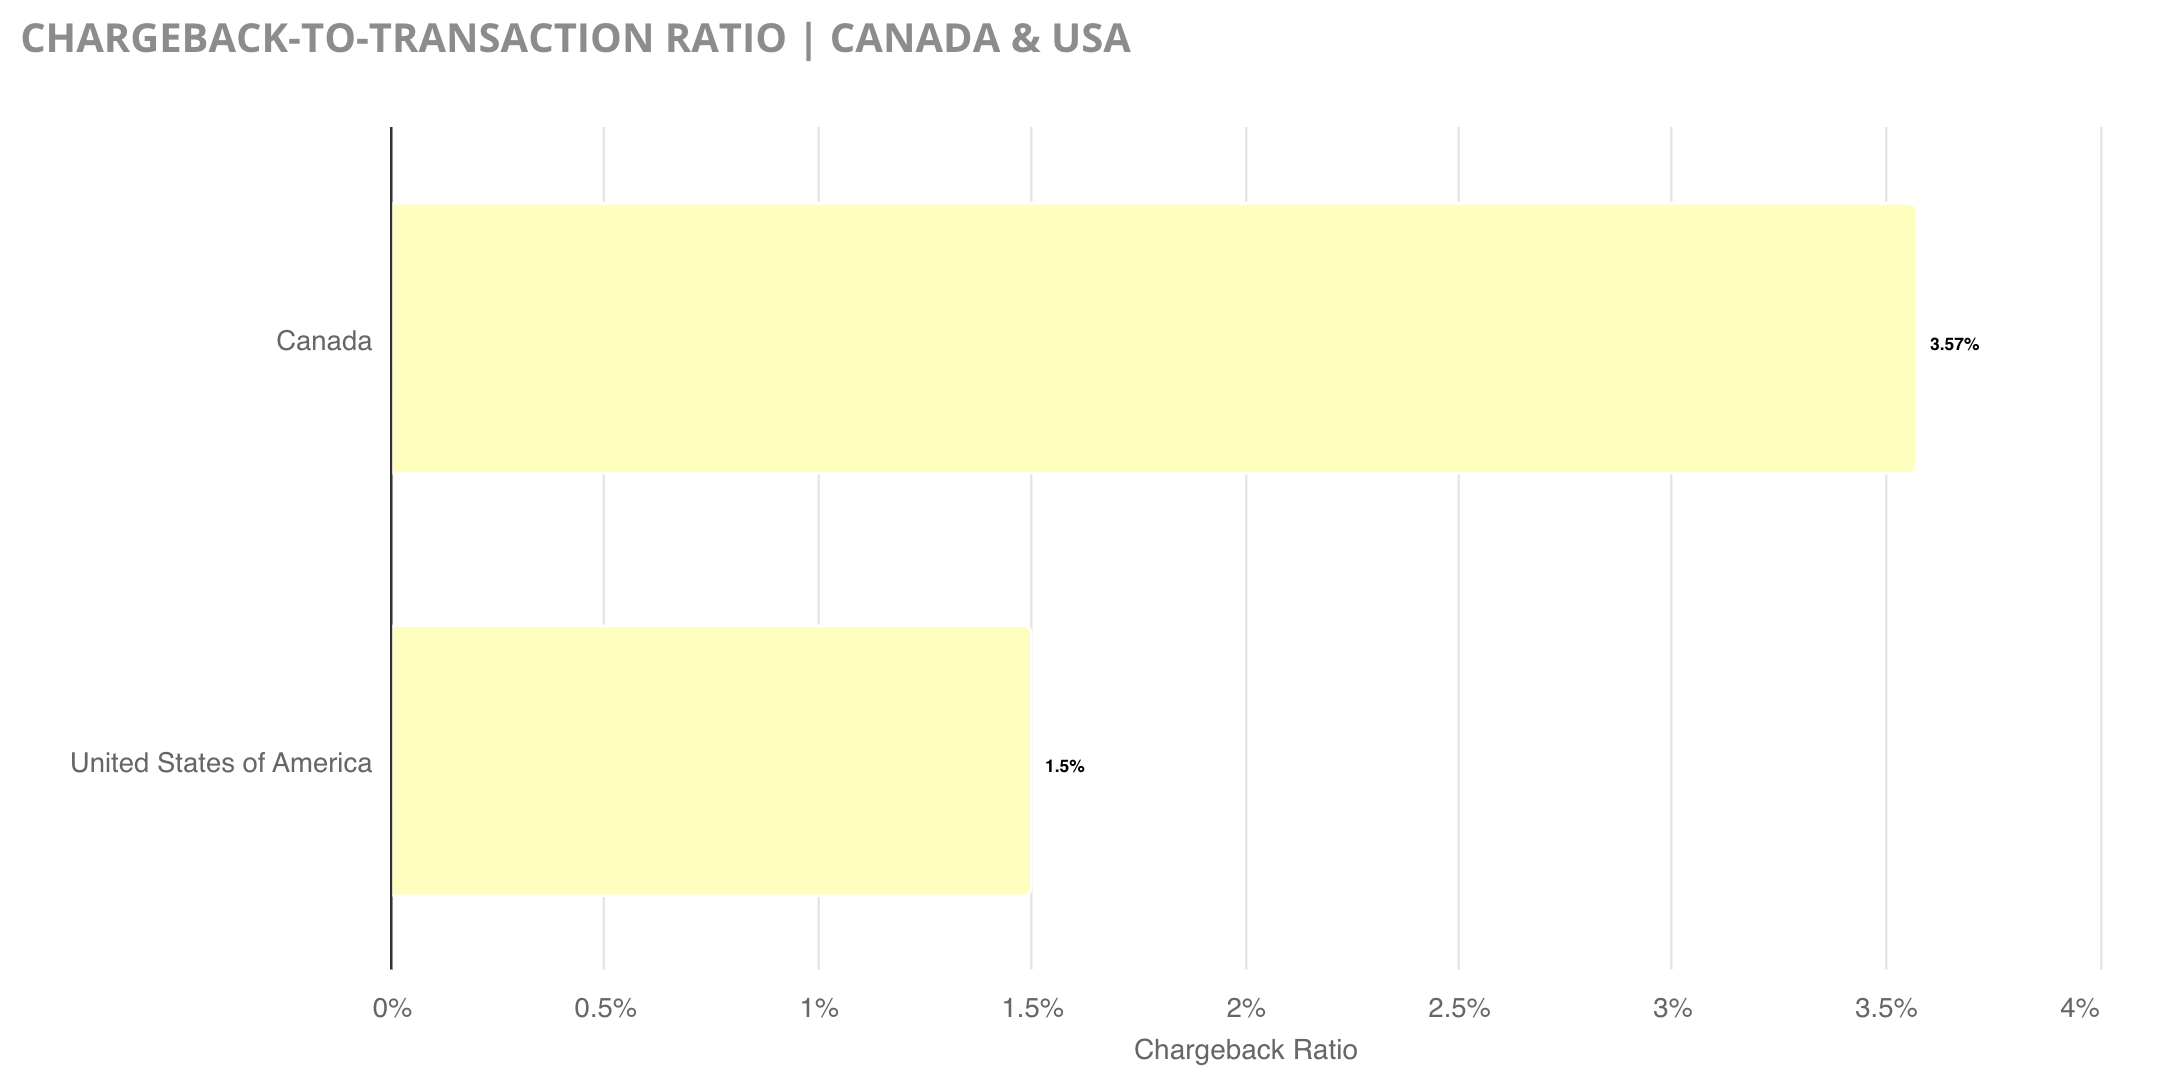 Chargeback-to-transaction ratio in Canada and US